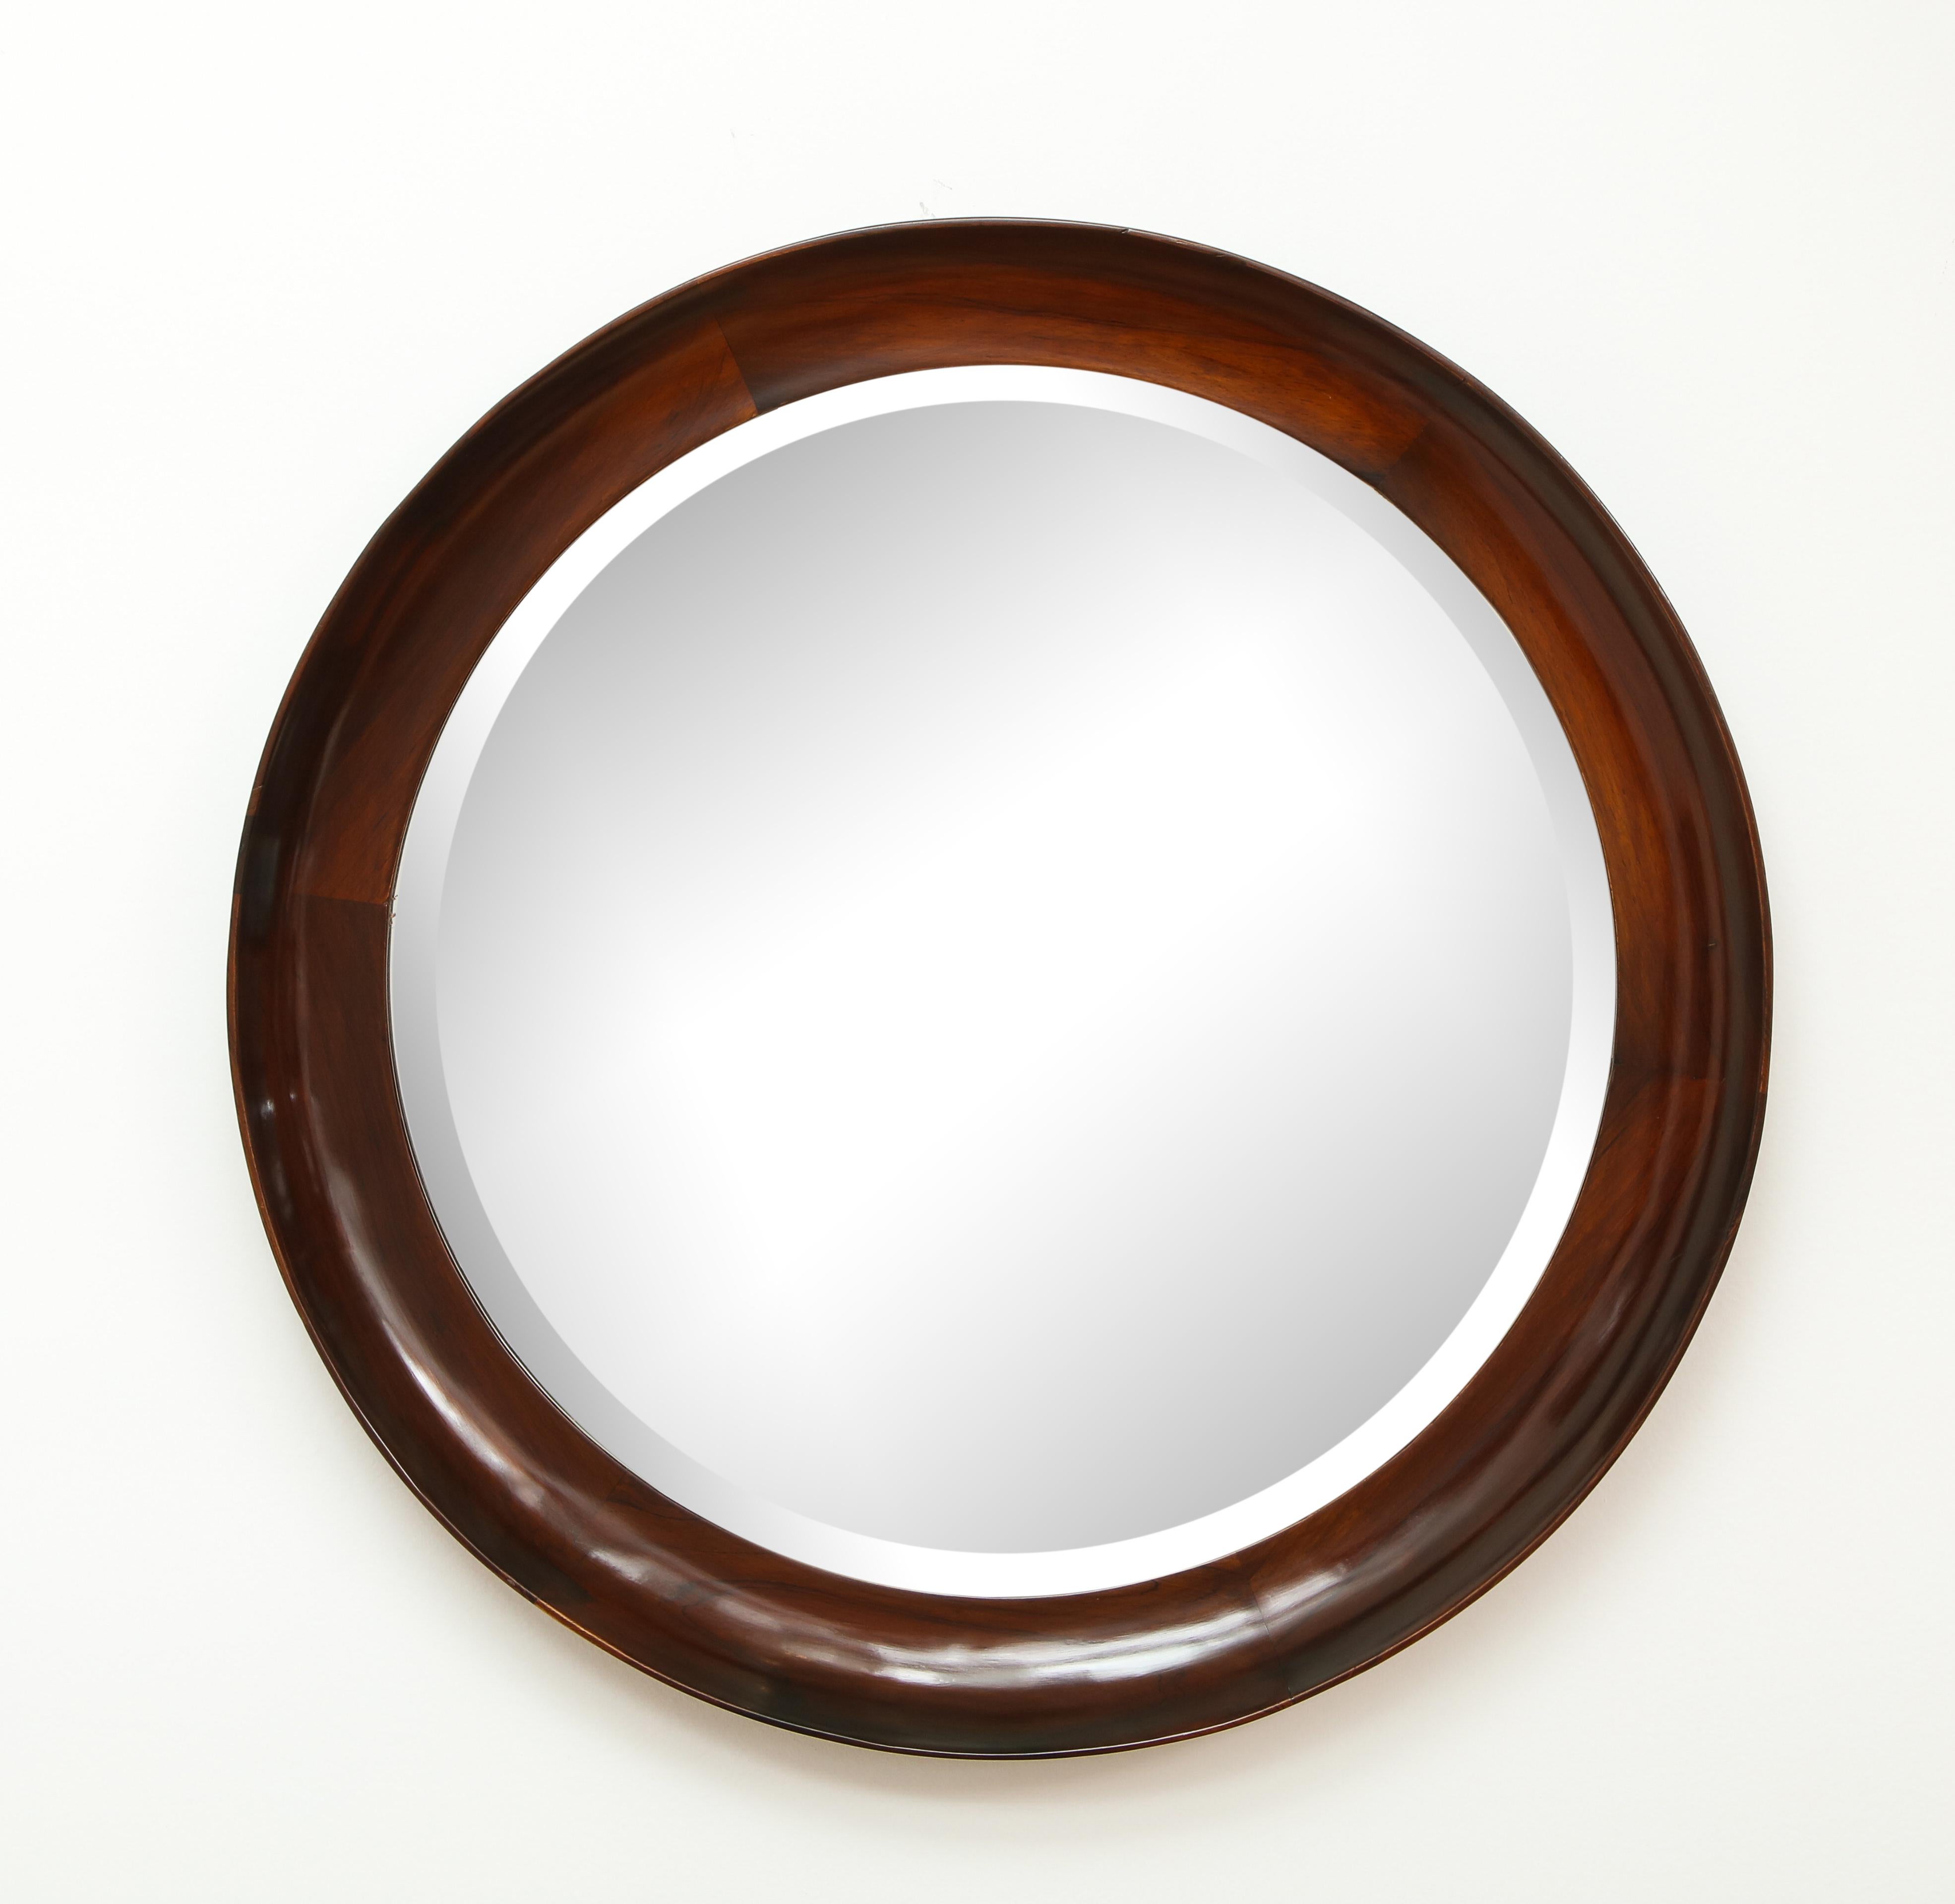 Brazilian mirror in solid wood by Oca. It measures 30.3 in (78 cm)
Oca was a furniture store that change the way houses were adorned in Brazil in the 1960s.